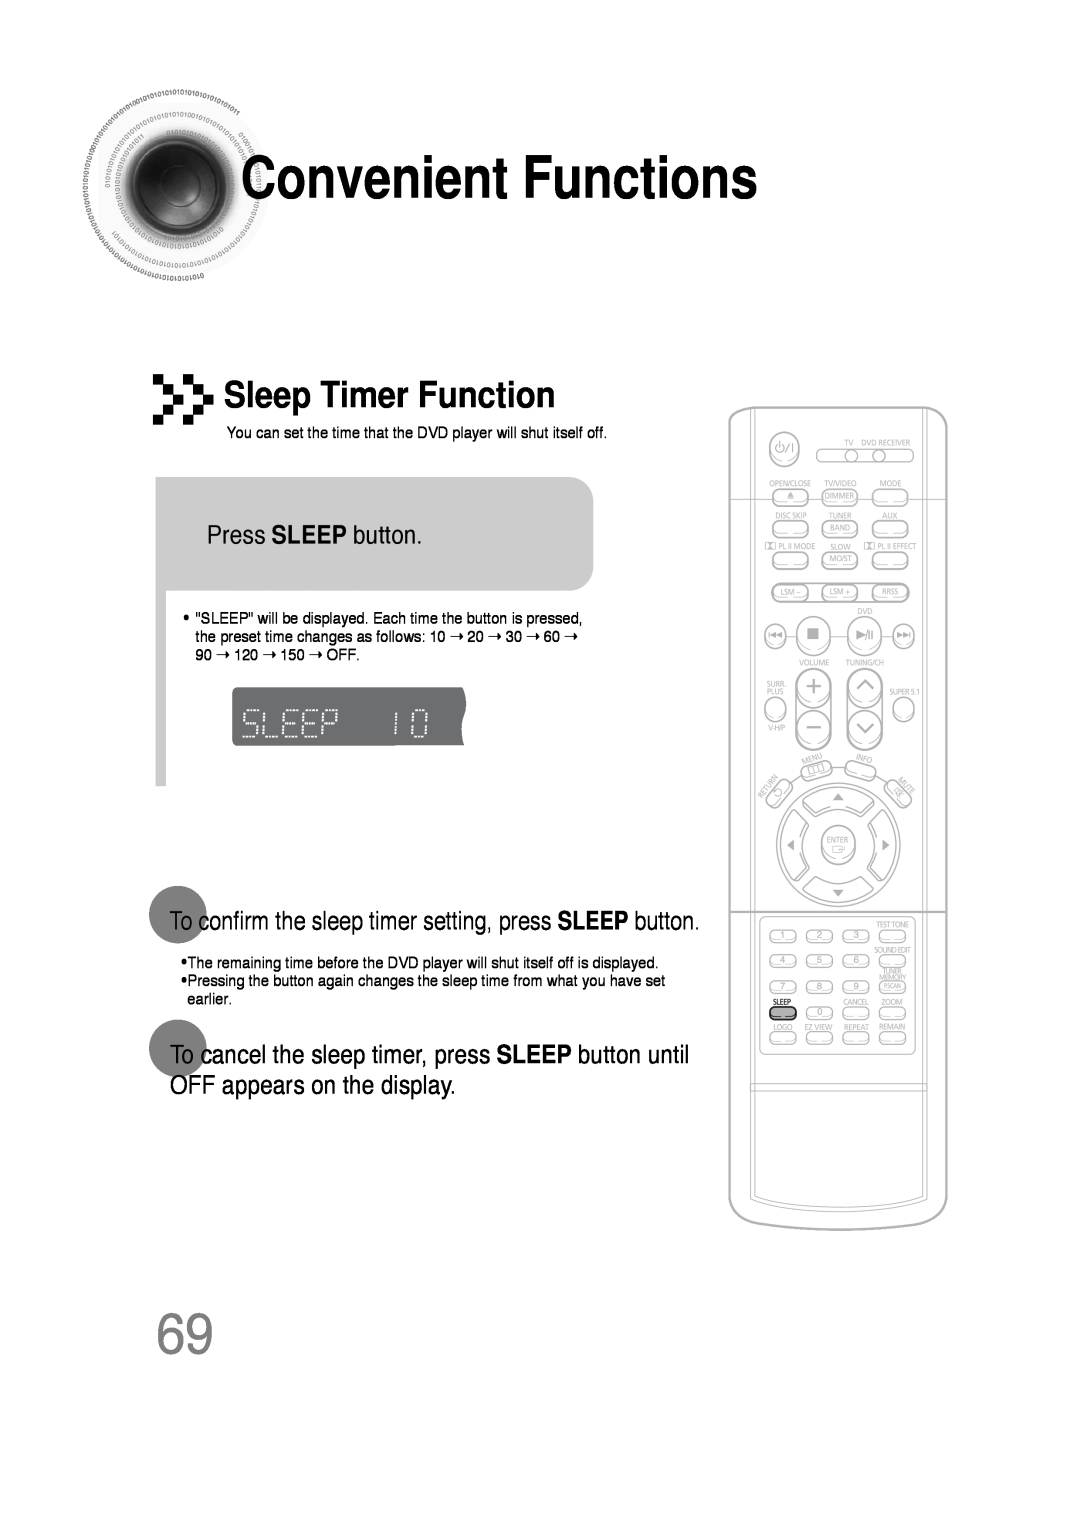 Samsung 20051111103302296 ConvenientFunctions, Sleep Timer Function, Press SLEEP button, OFF appears on the display 